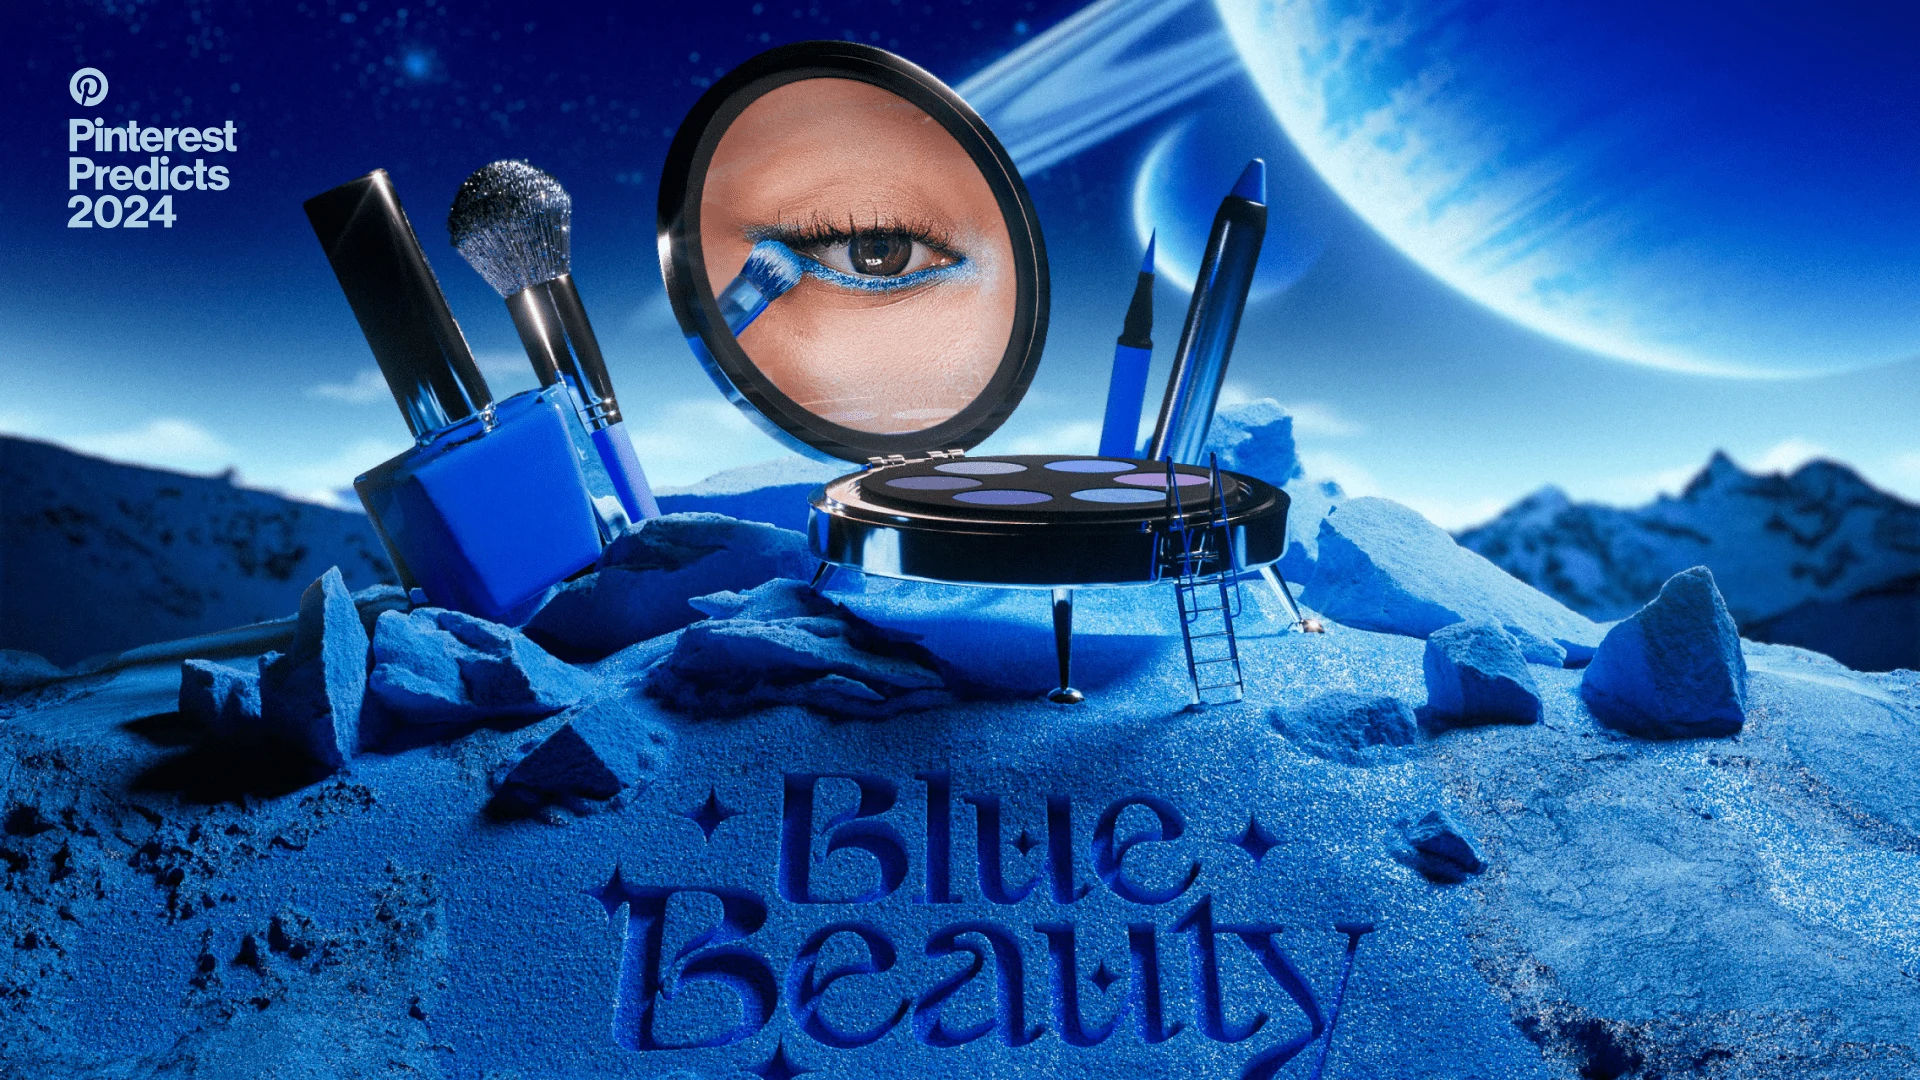 on a miniature moon landing, an eye palette is the spaceship and reveals a blue eye makeup, side by side with blue liners, brush and nail polish